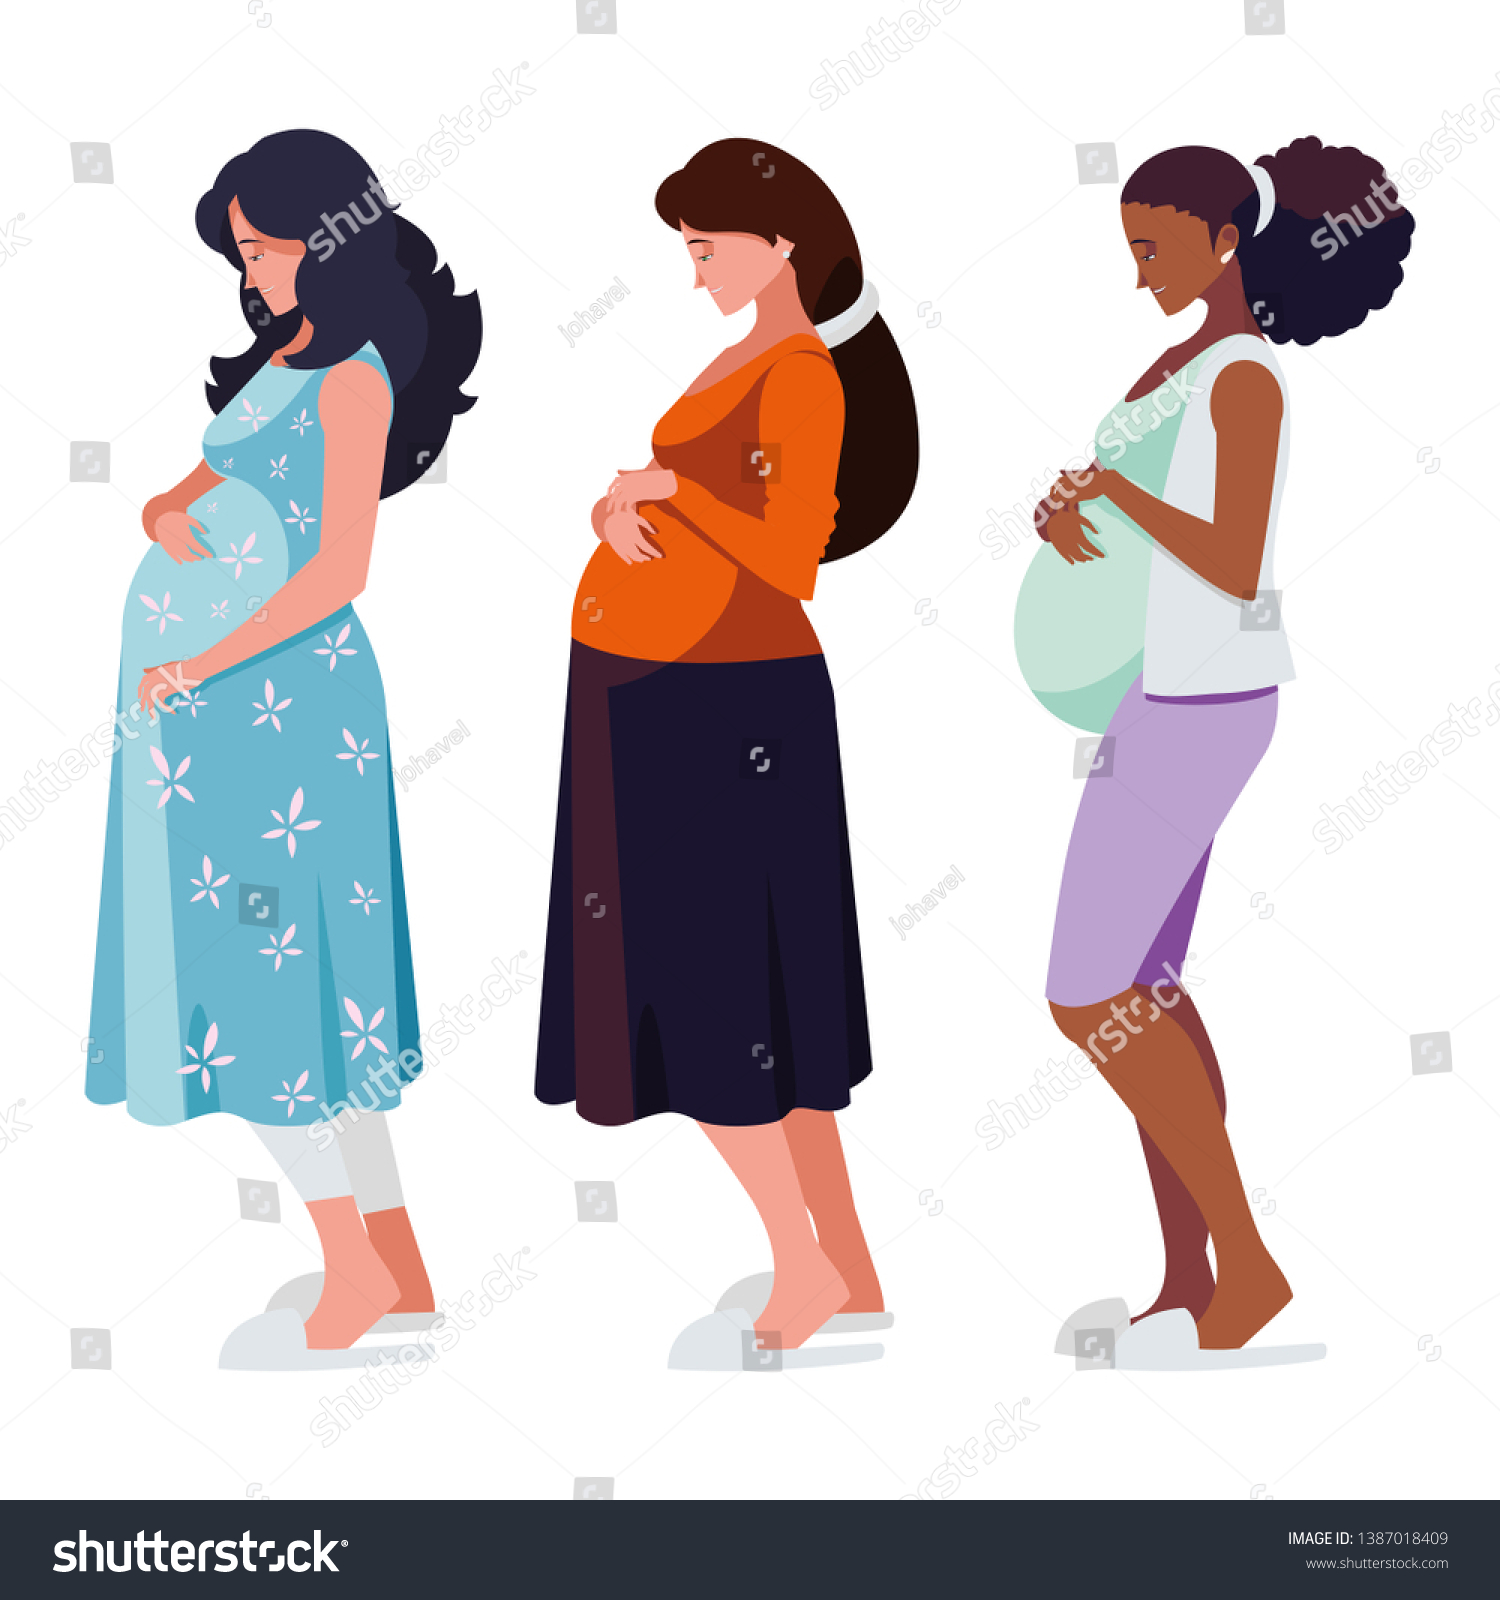 Interracial Group Pregnancy Women Characters Stock Vector Royalty Free 1387018409 Shutterstock